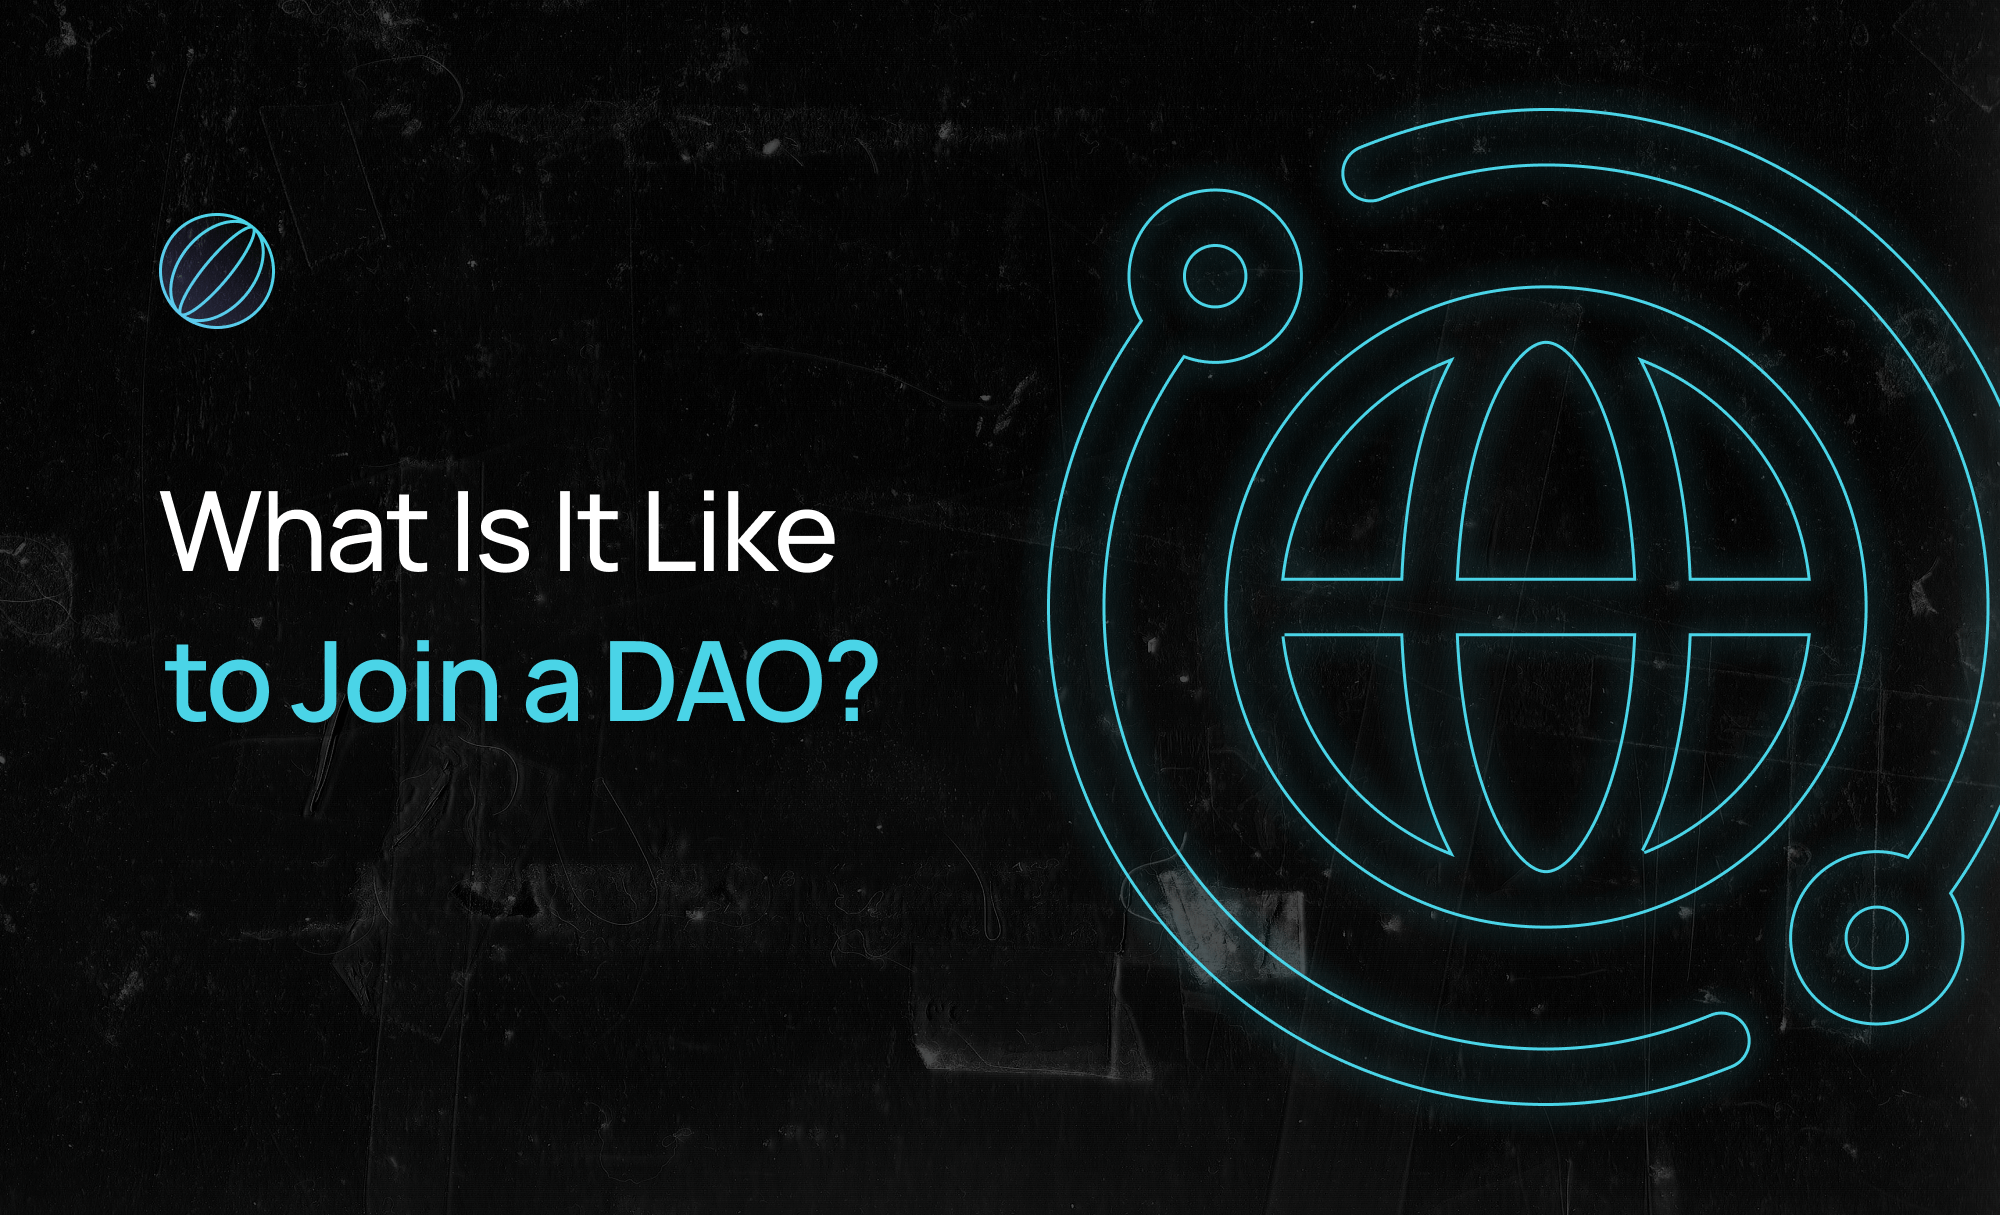 What Is It Like to Join a DAO?